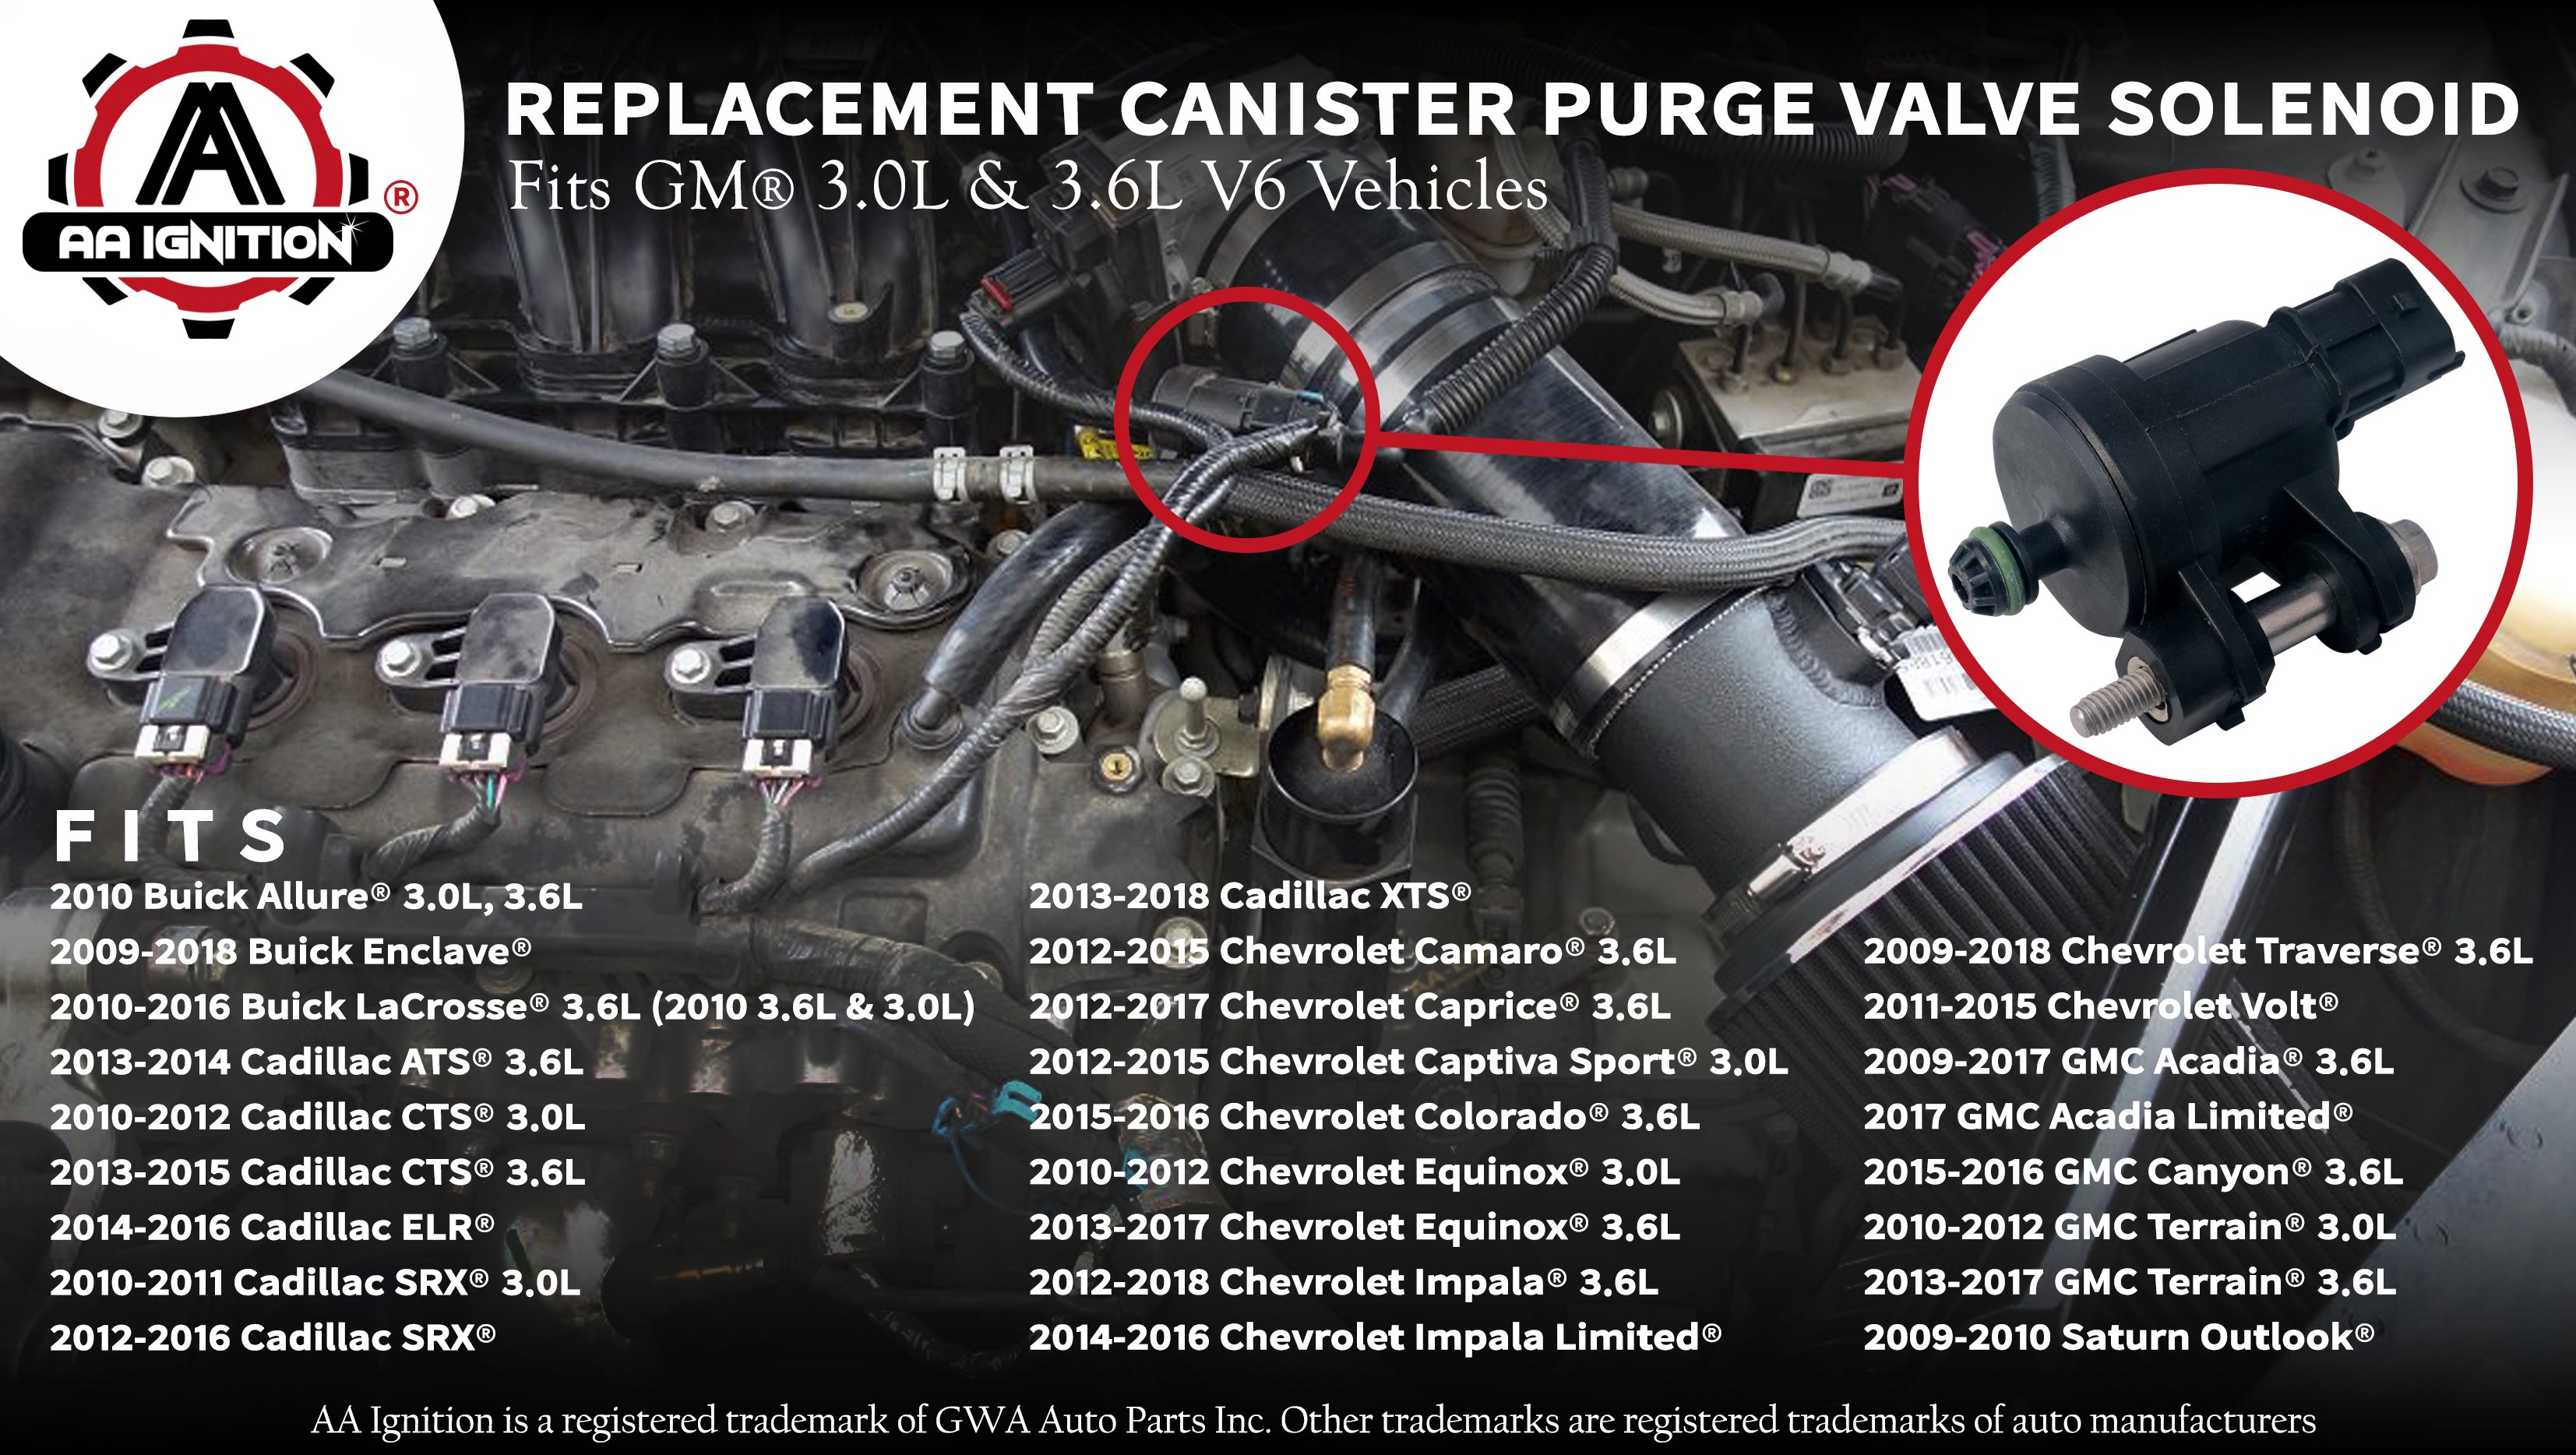 Vapor Canister Purge Valve Solenoid Replaces 12610560, 911-082, 12690512,  12661763nbsp;- Fits 3.0L, 3.6L V6 Chevy Impala, Traverse, Colorado,  Cadillac CTS, SRX, GMC Acadia, Canyon, Terrain and more